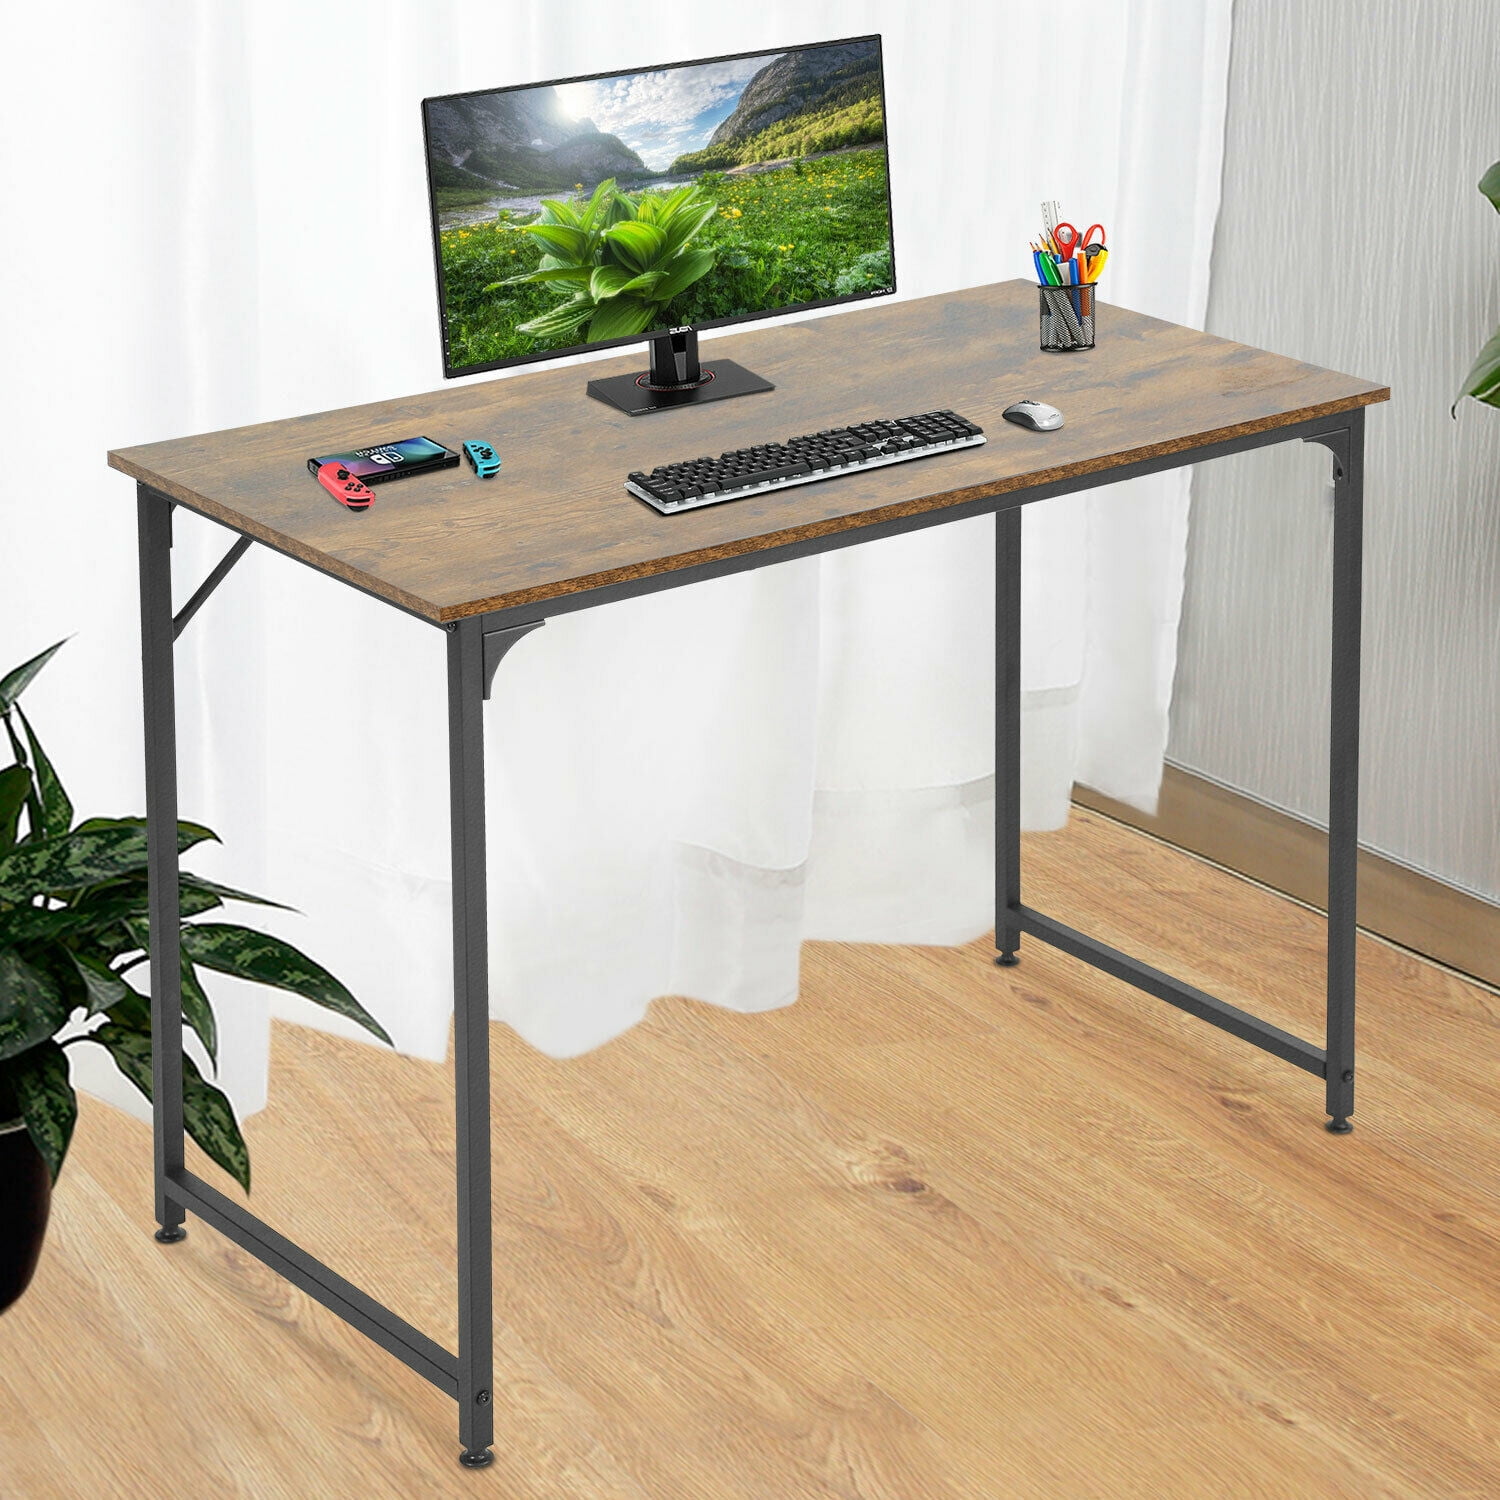 YITAHOME Computer Desk PC Laptop Table Study Workstation Wood Home Office Desk 